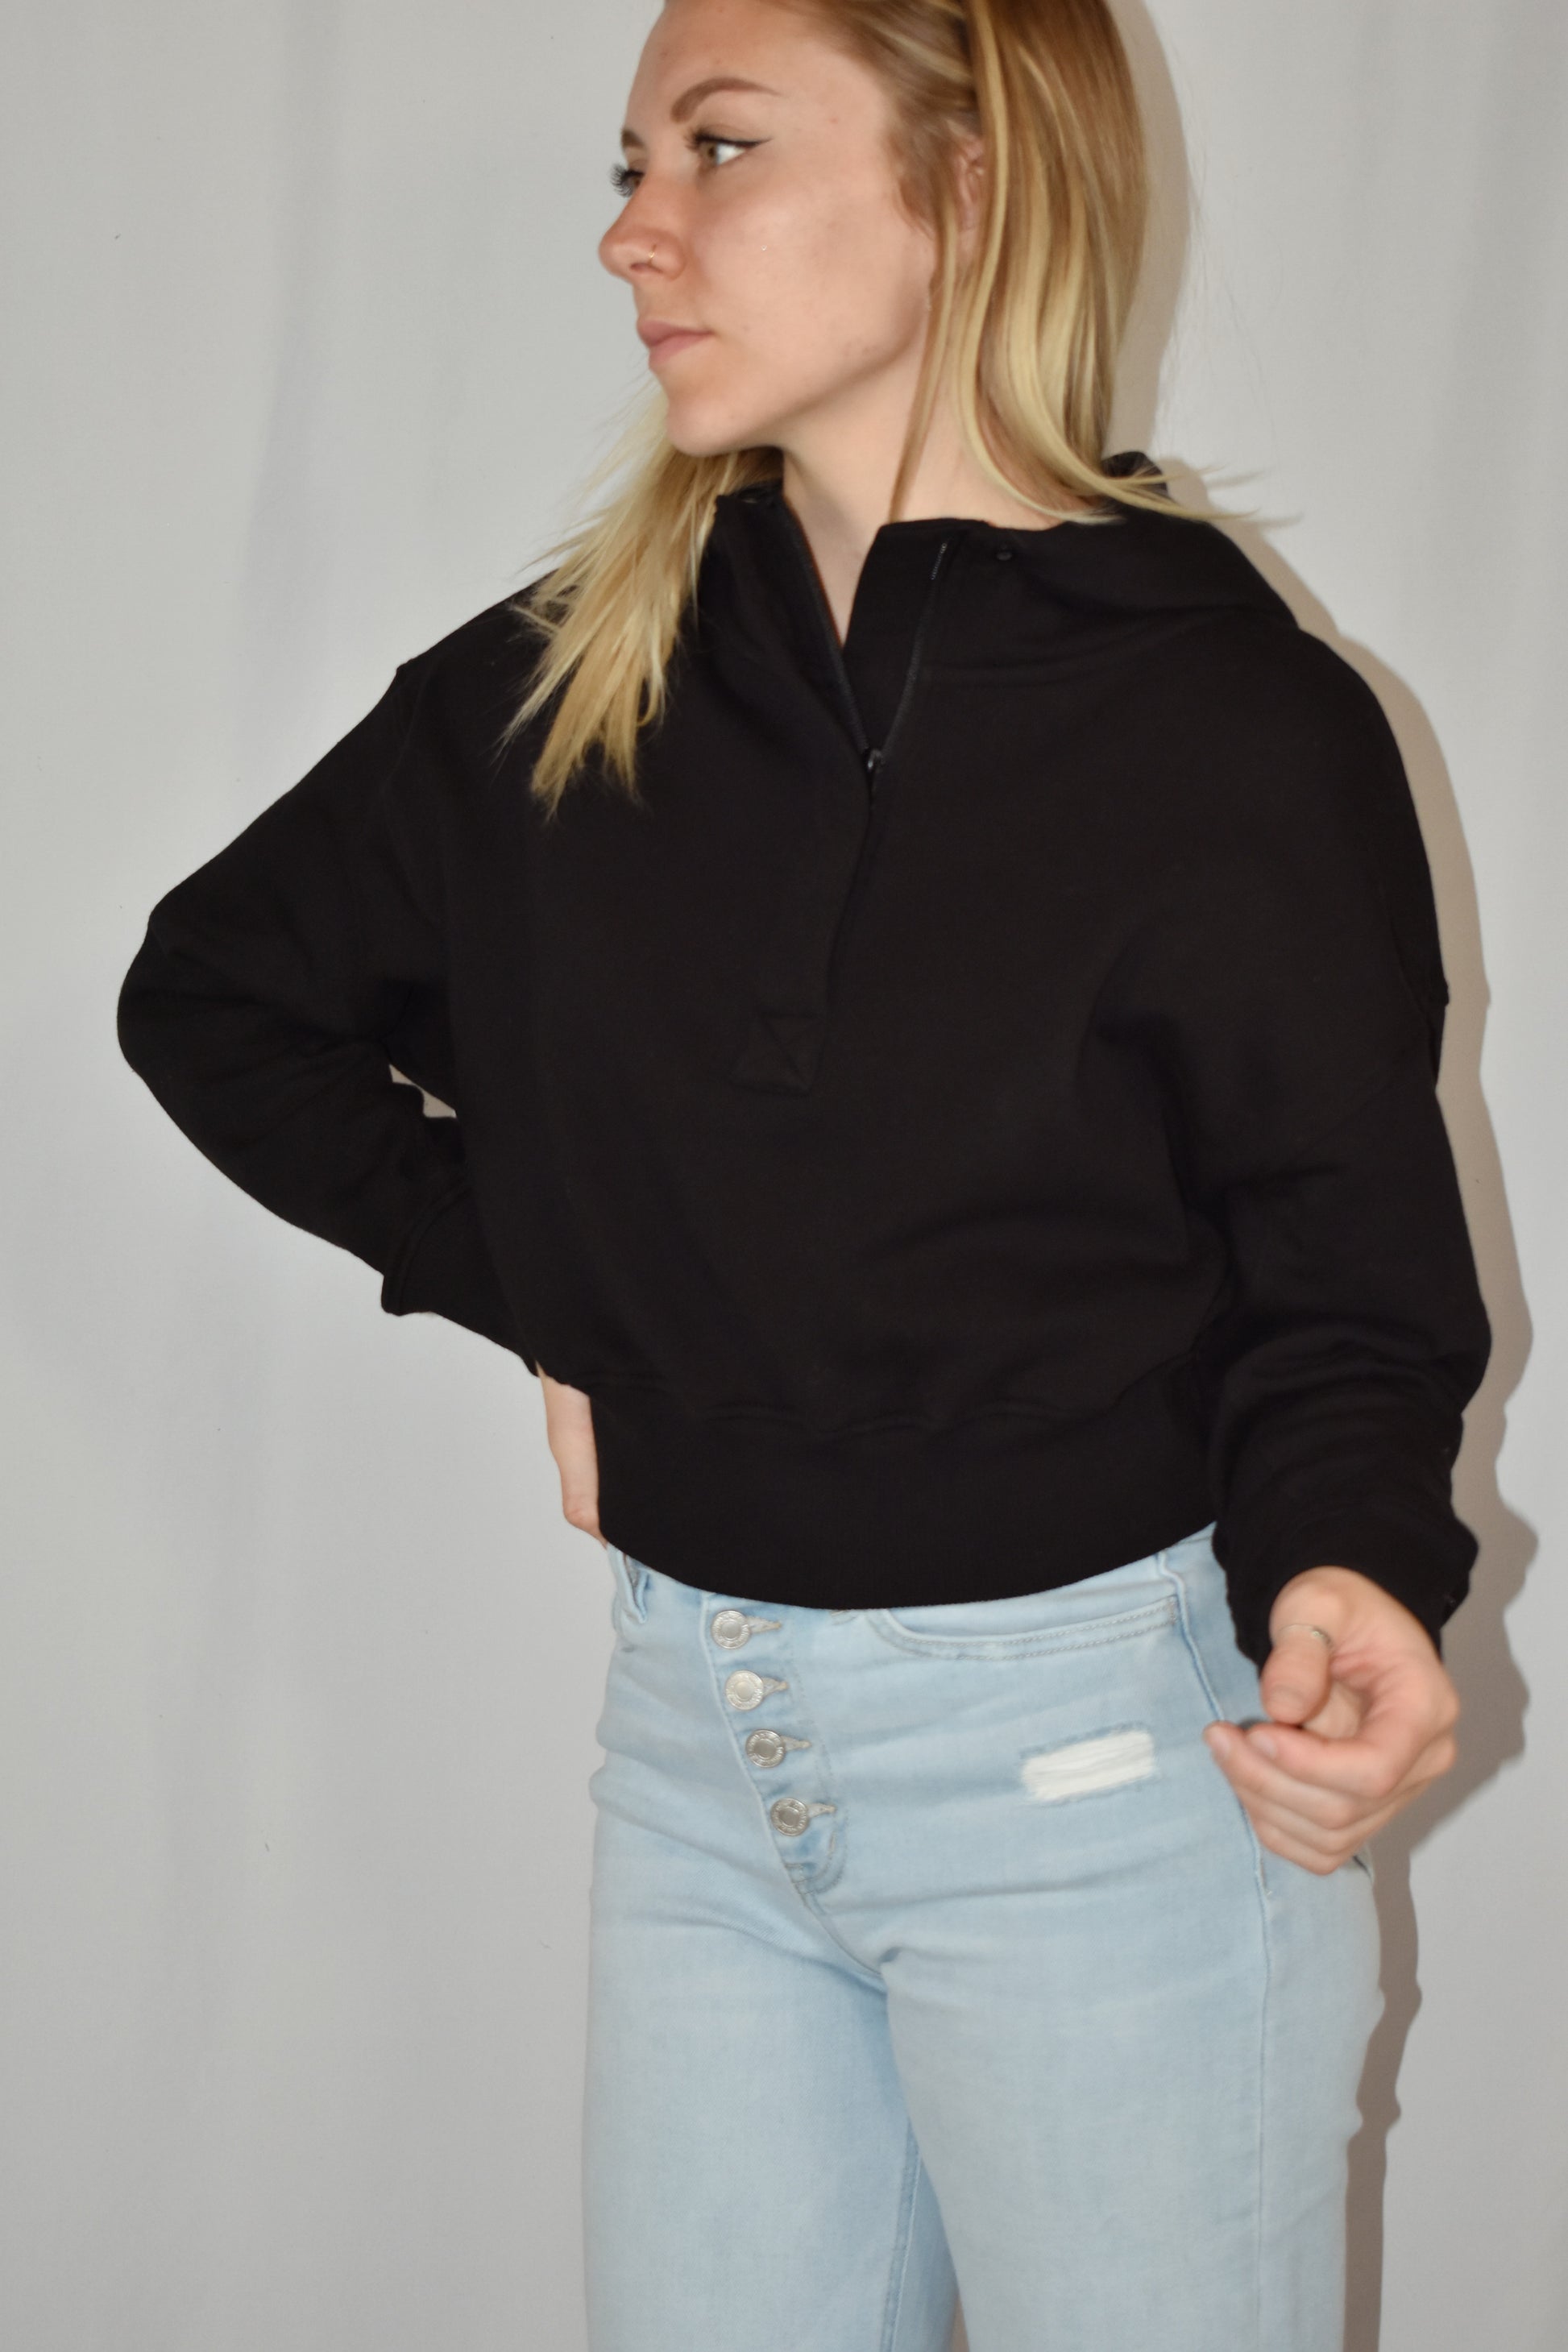 Cropped black hoodie with half placket zip with button closure at neckline. Ribbed cuffs and fleece lining.